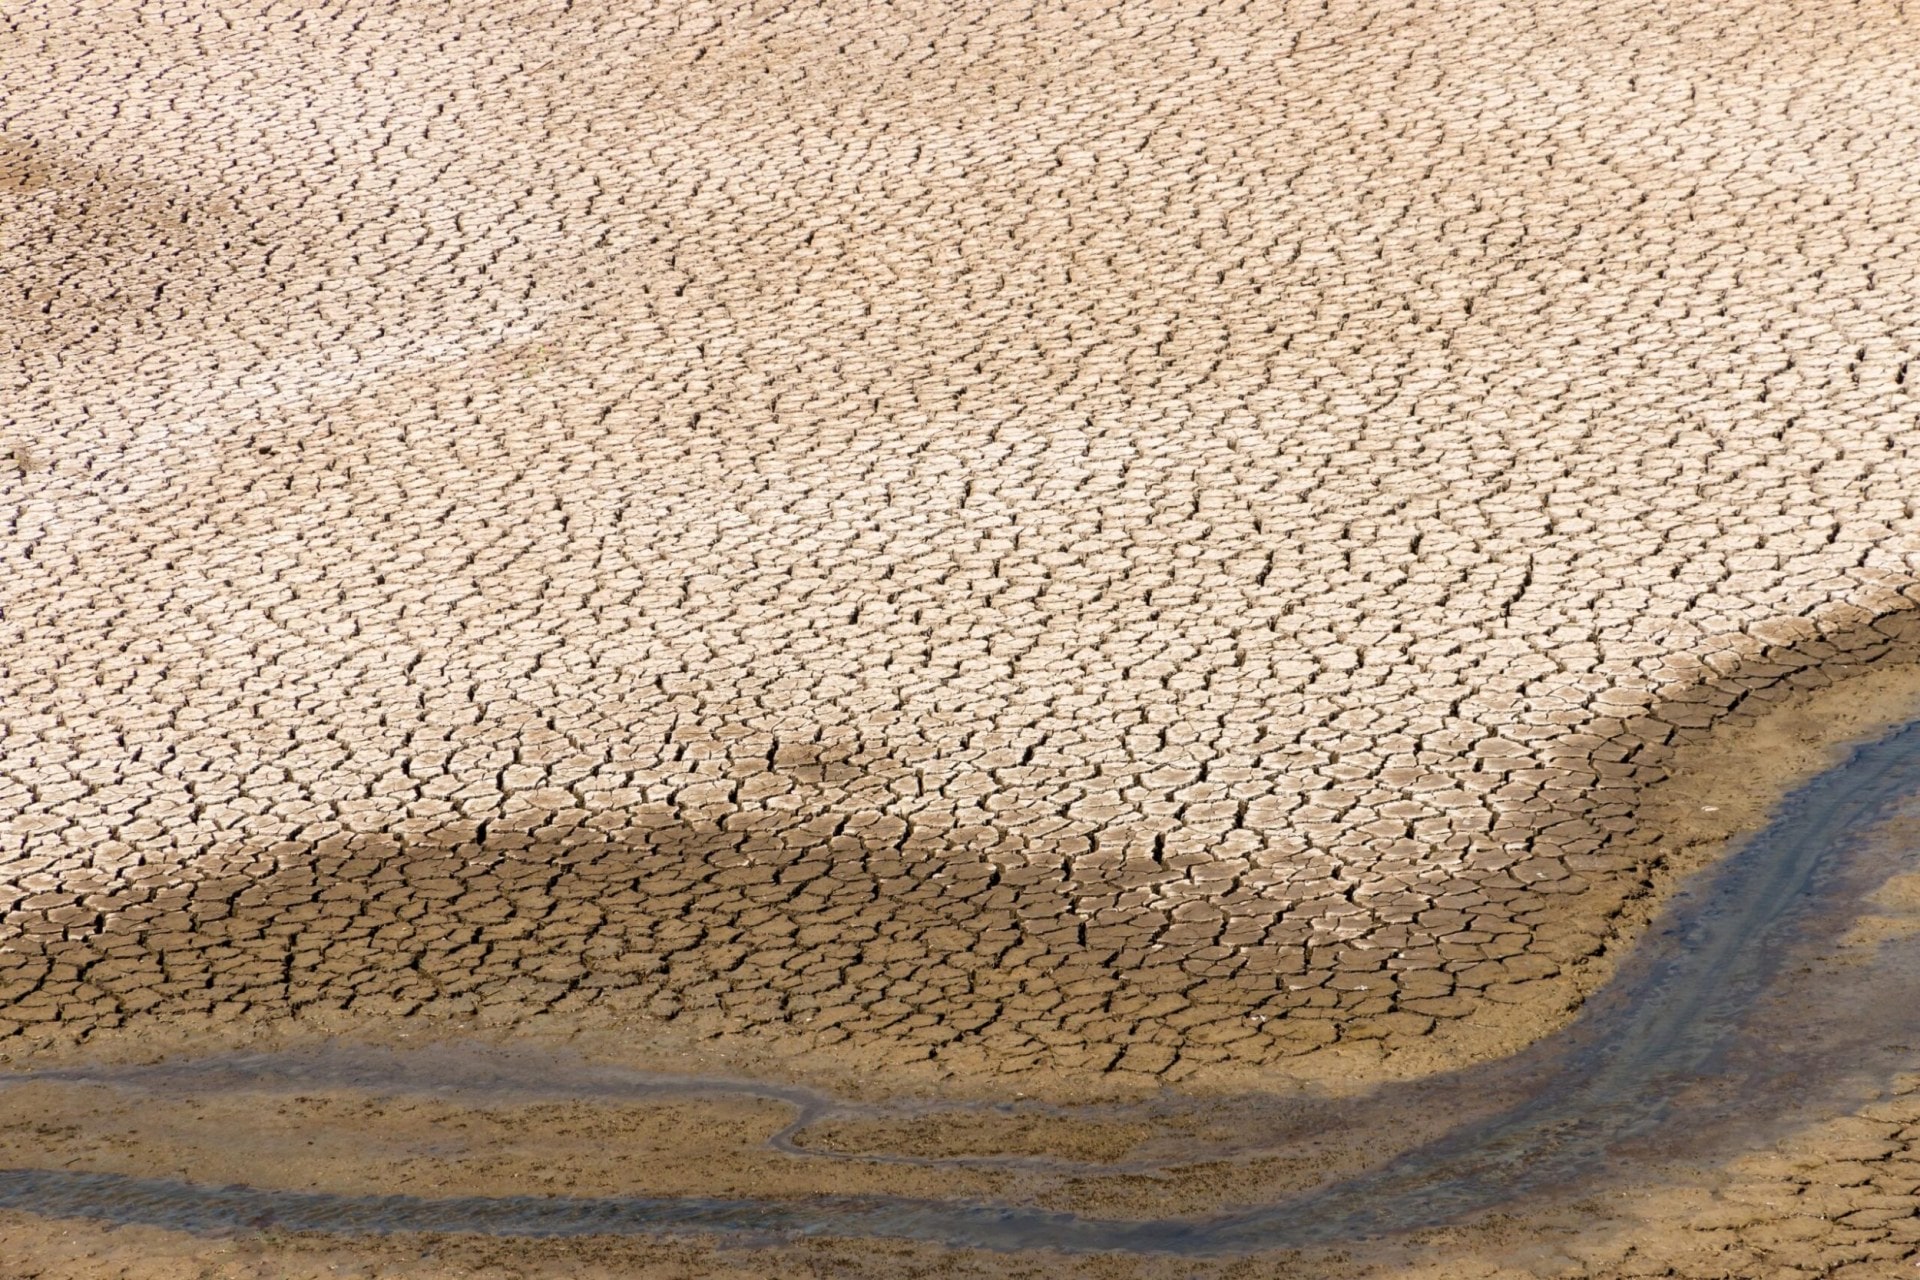 Cracked earth from extreme drought